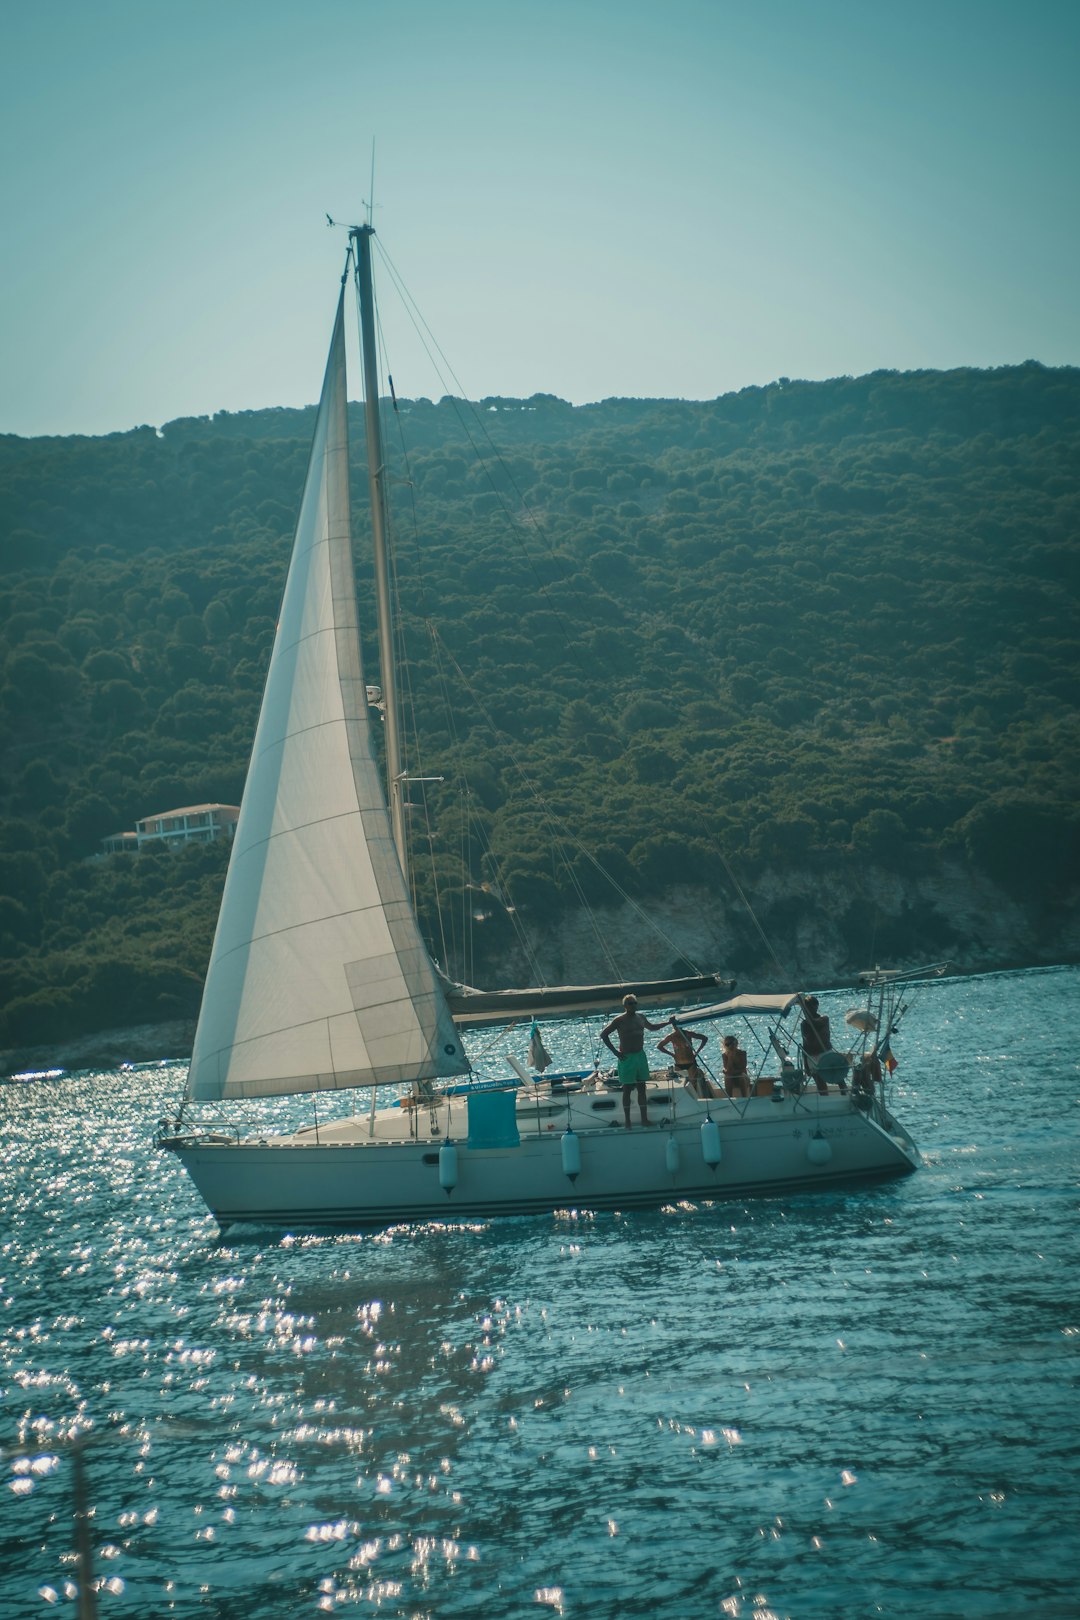 people riding on white and blue sail boat on sea during daytime